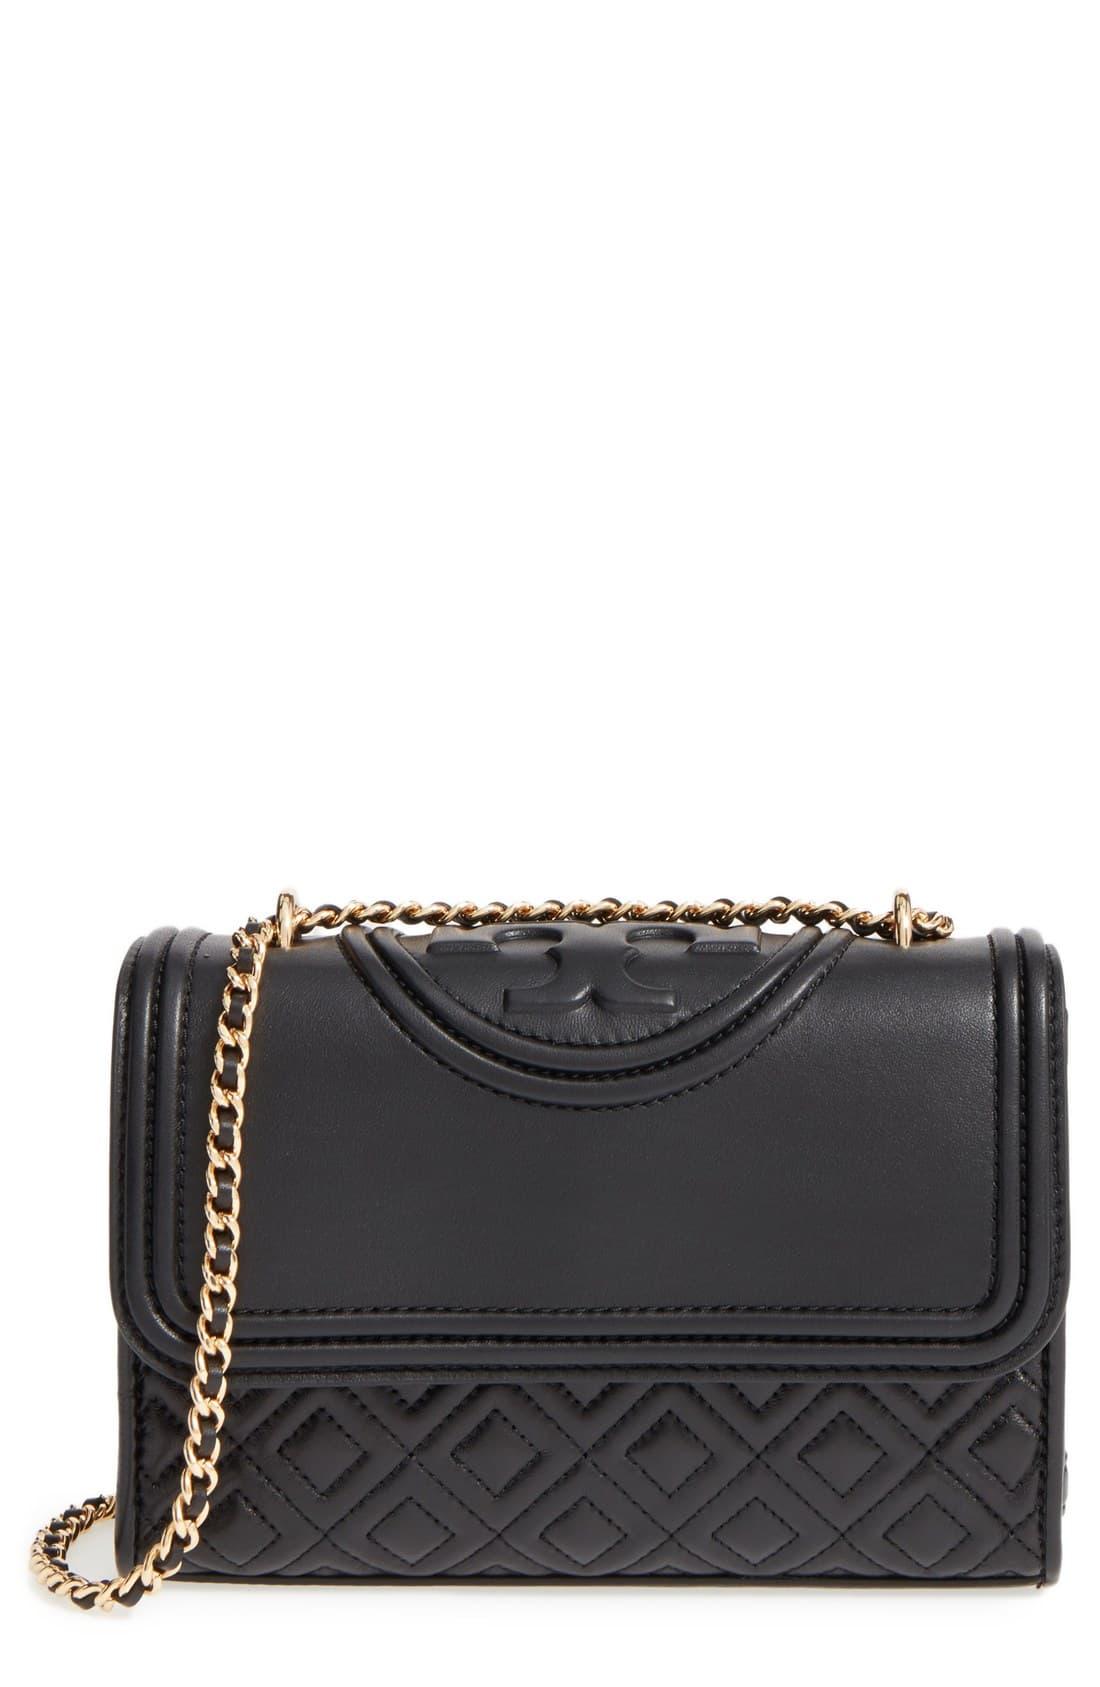 Tory Burch 'small Fleming' Quilted Leather Shoulder Bag in Black ...